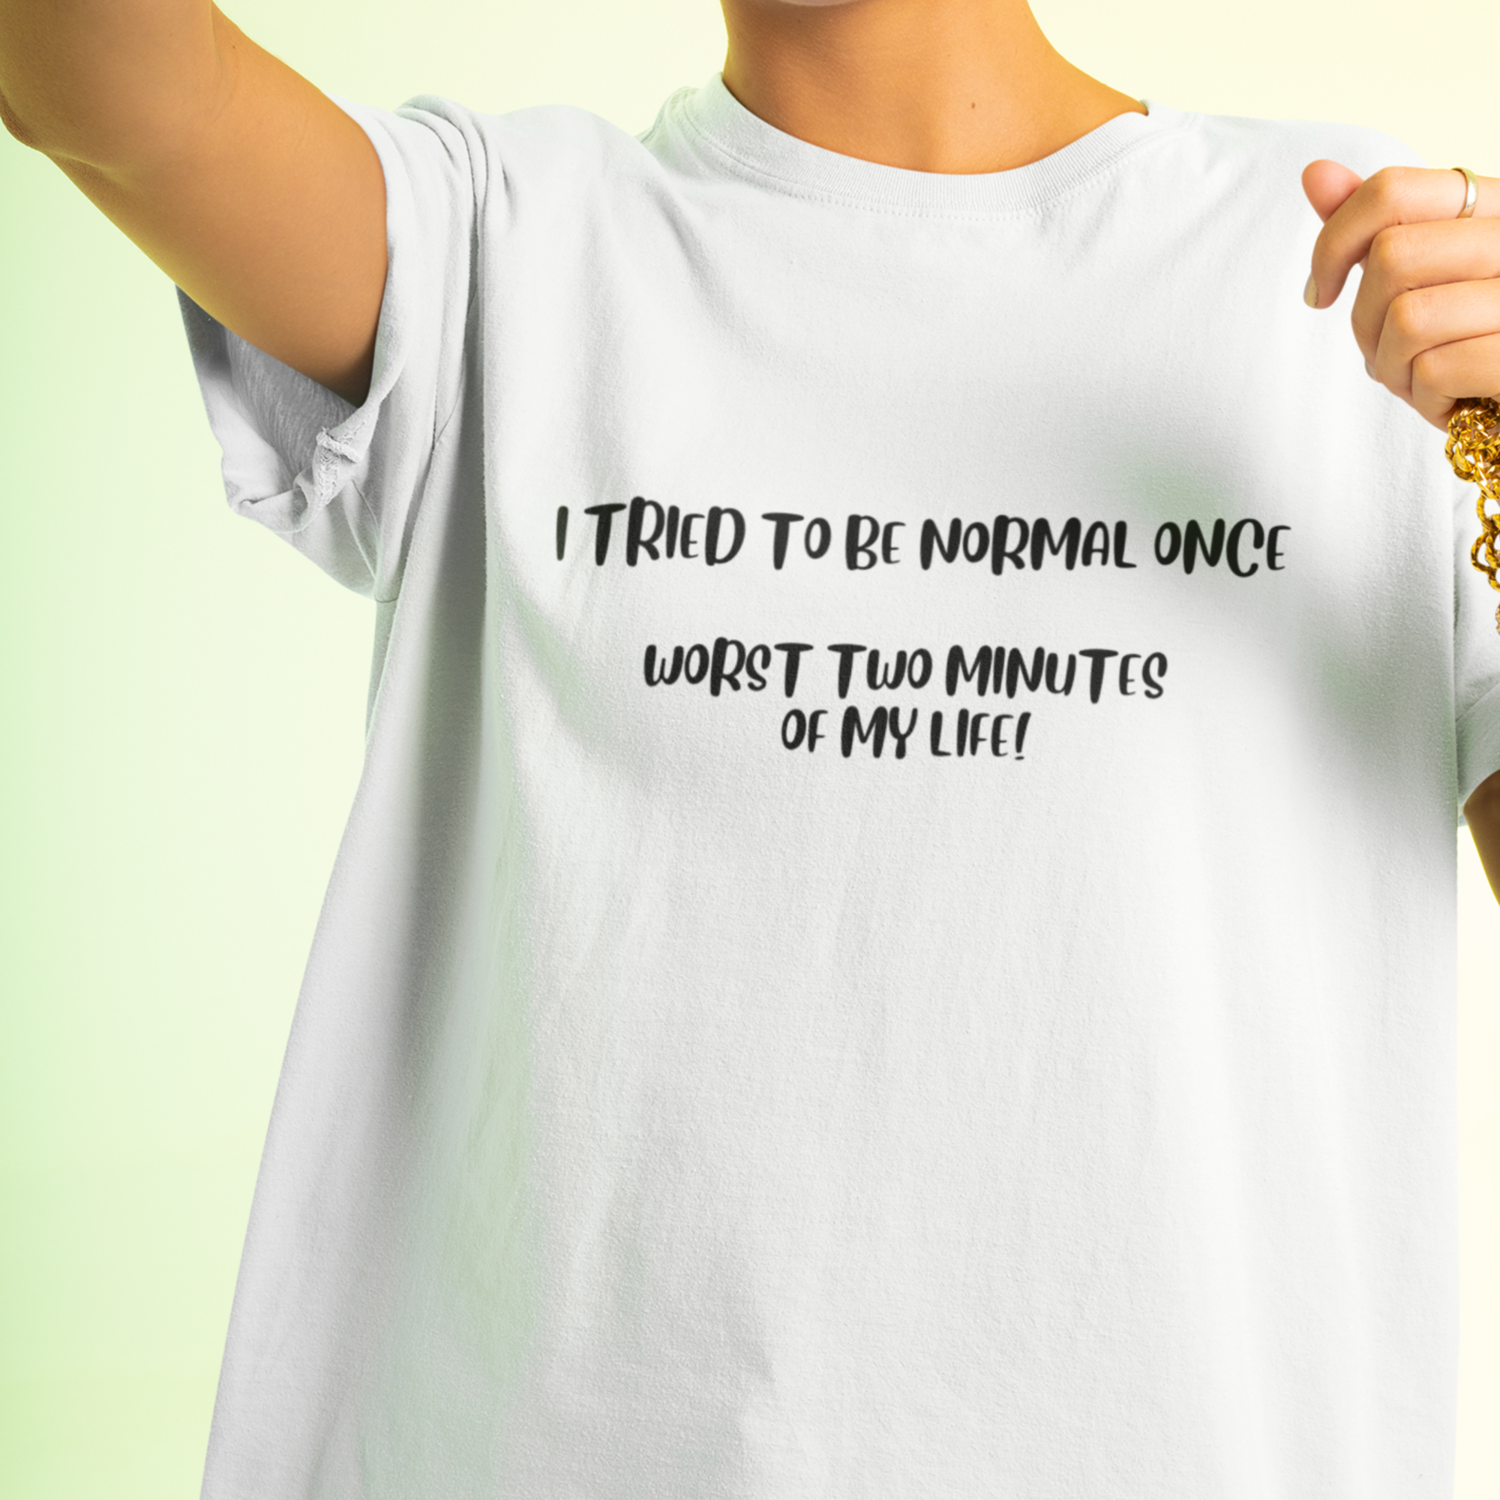 Tried to be normal once White T-Shirt Unisex - Small - 5xl